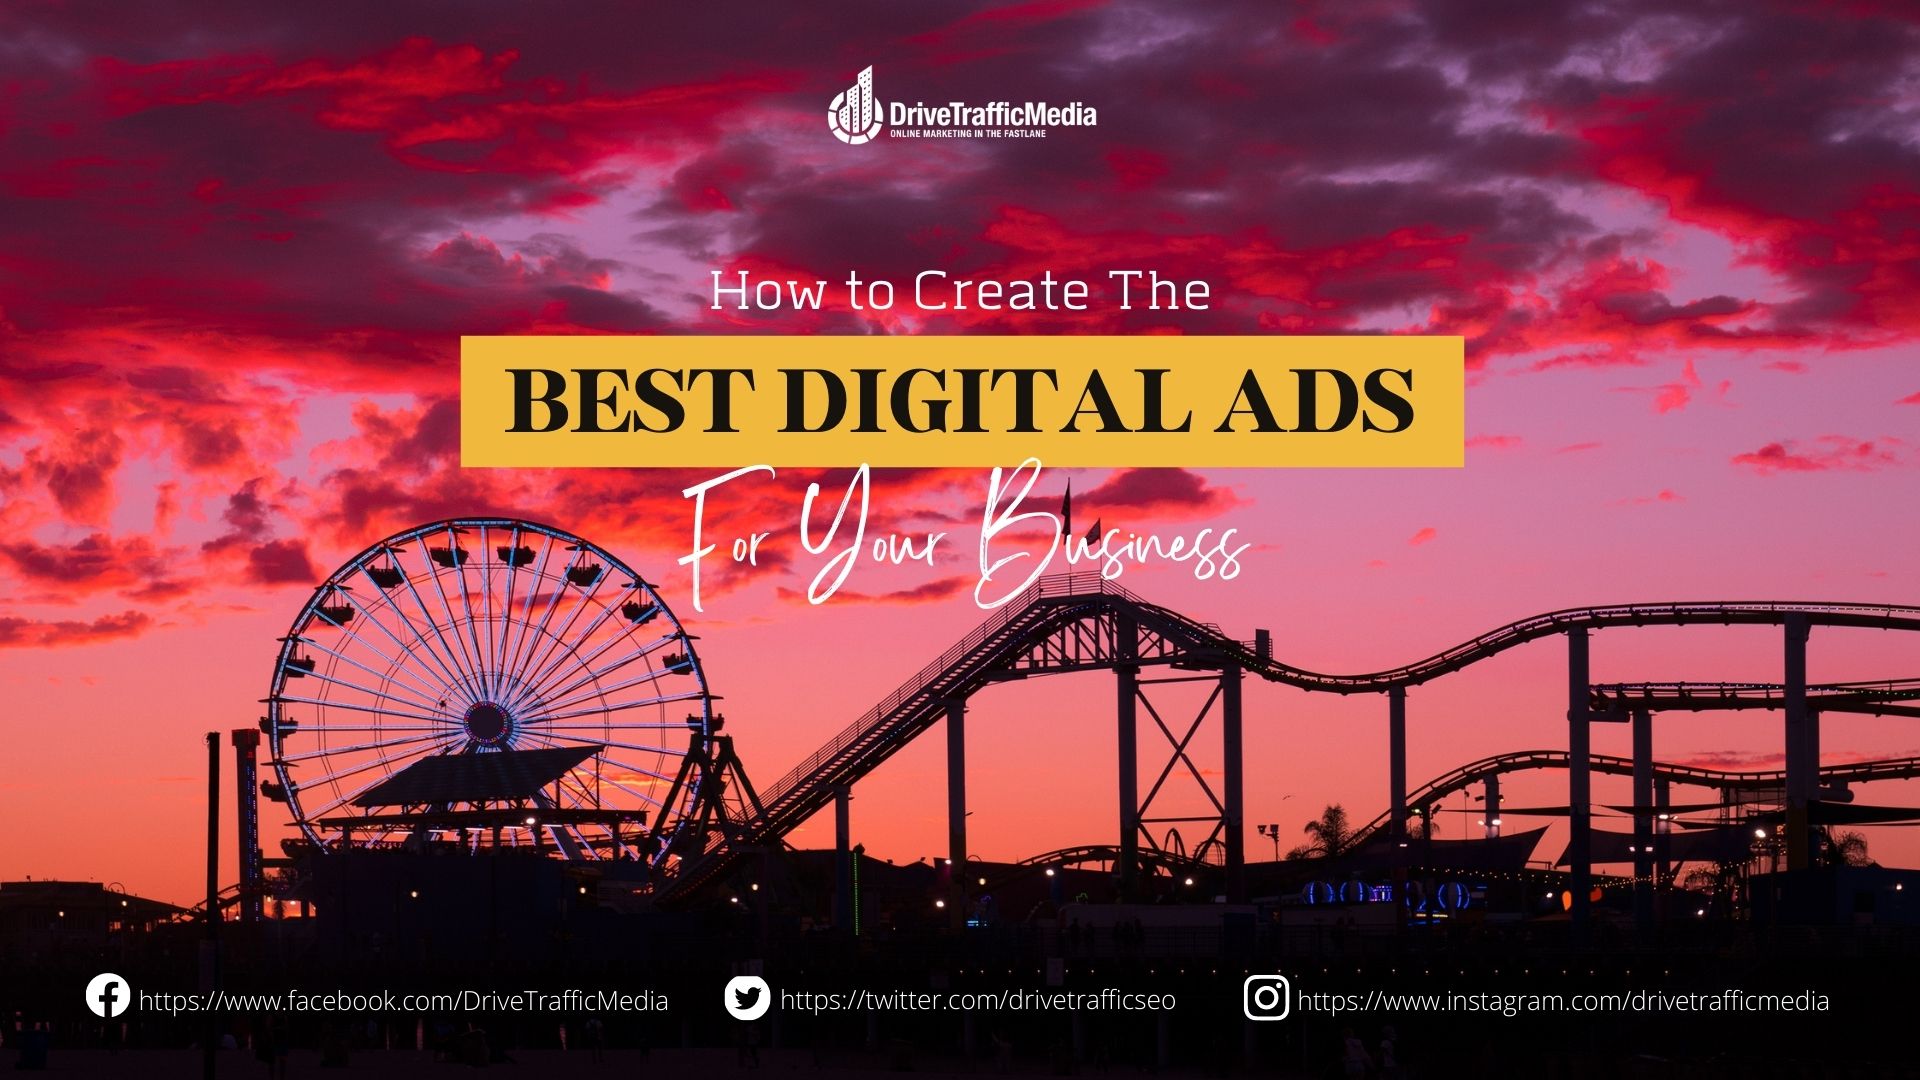 los-angeles-seo-and-ppc-company-discuss-how-to-create-the-best-digital-ads